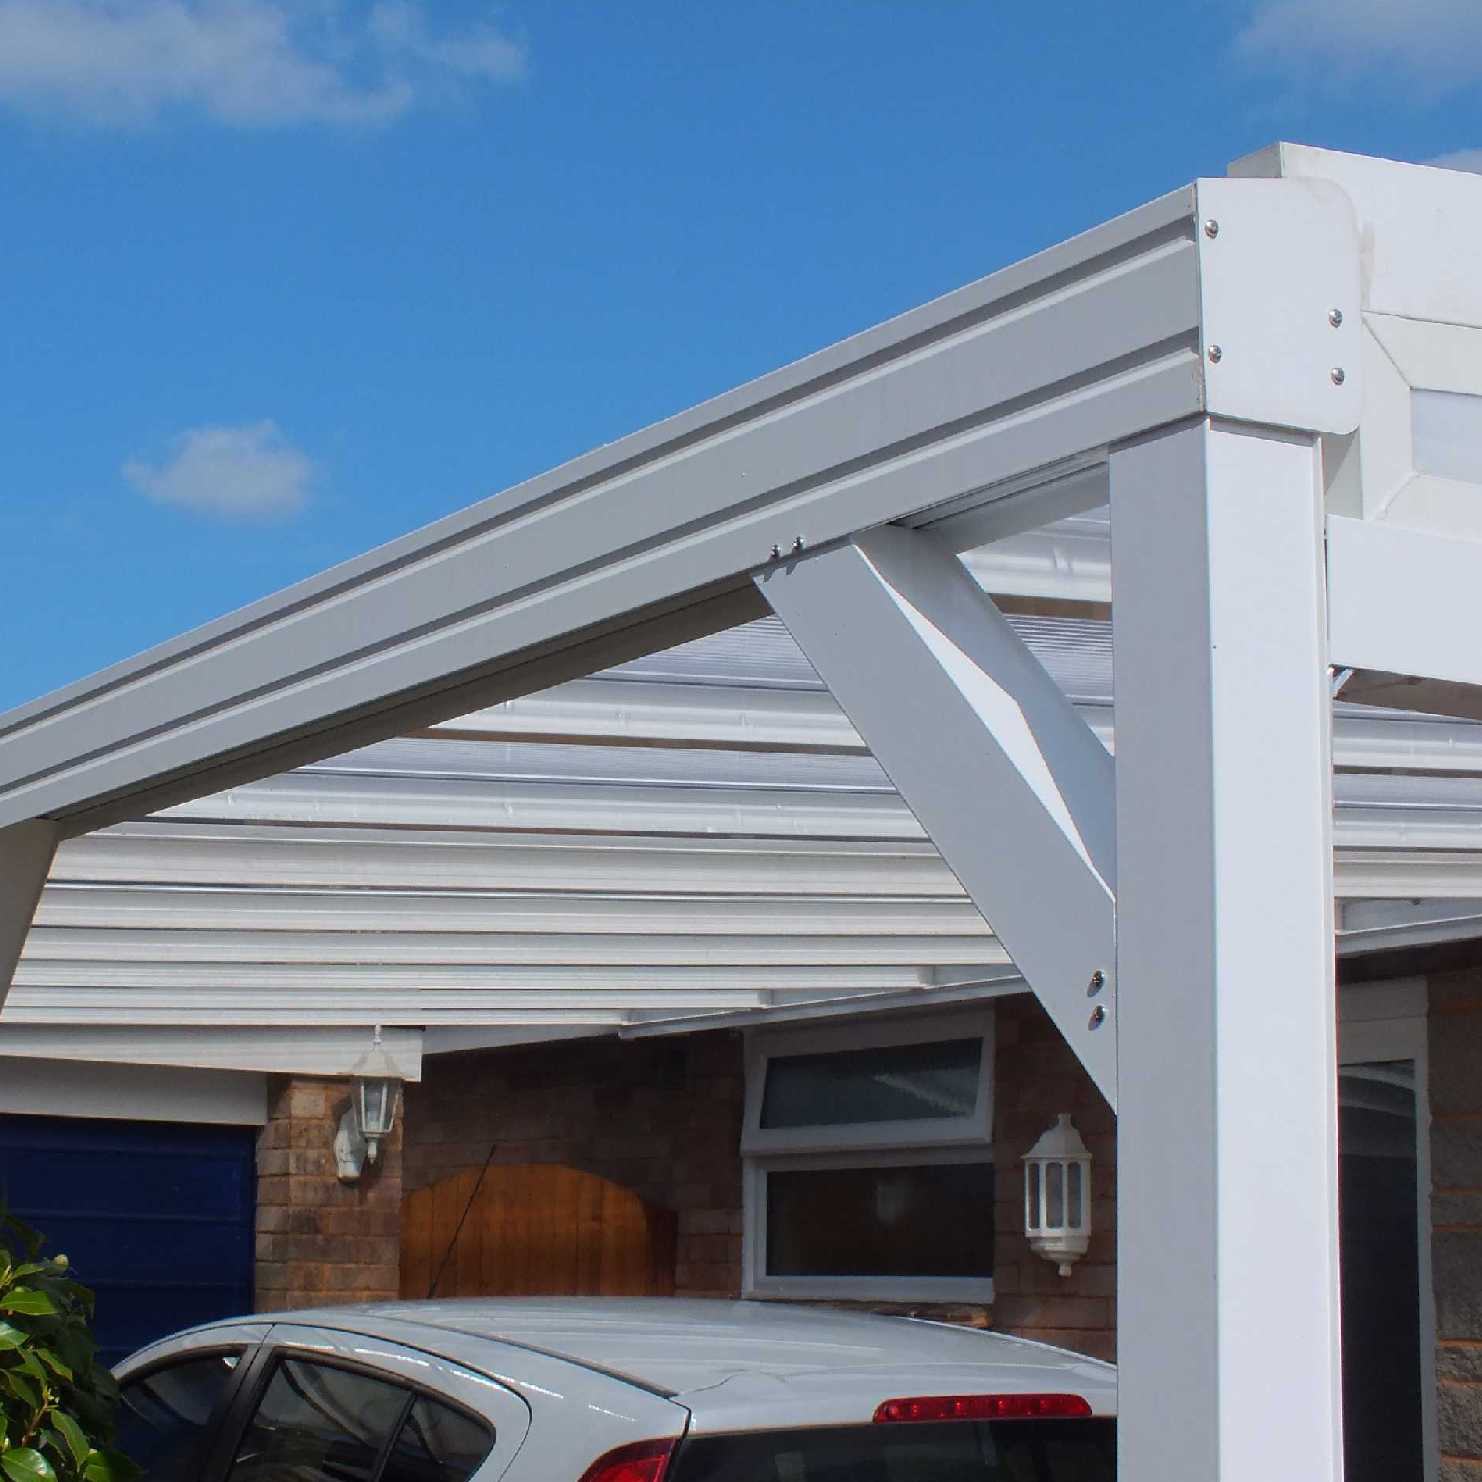 Great deals on Omega Smart Lean-To Canopy, White with 16mm Polycarbonate Glazing - 10.7m (W) x 4.5m (P), (5) Supporting Posts